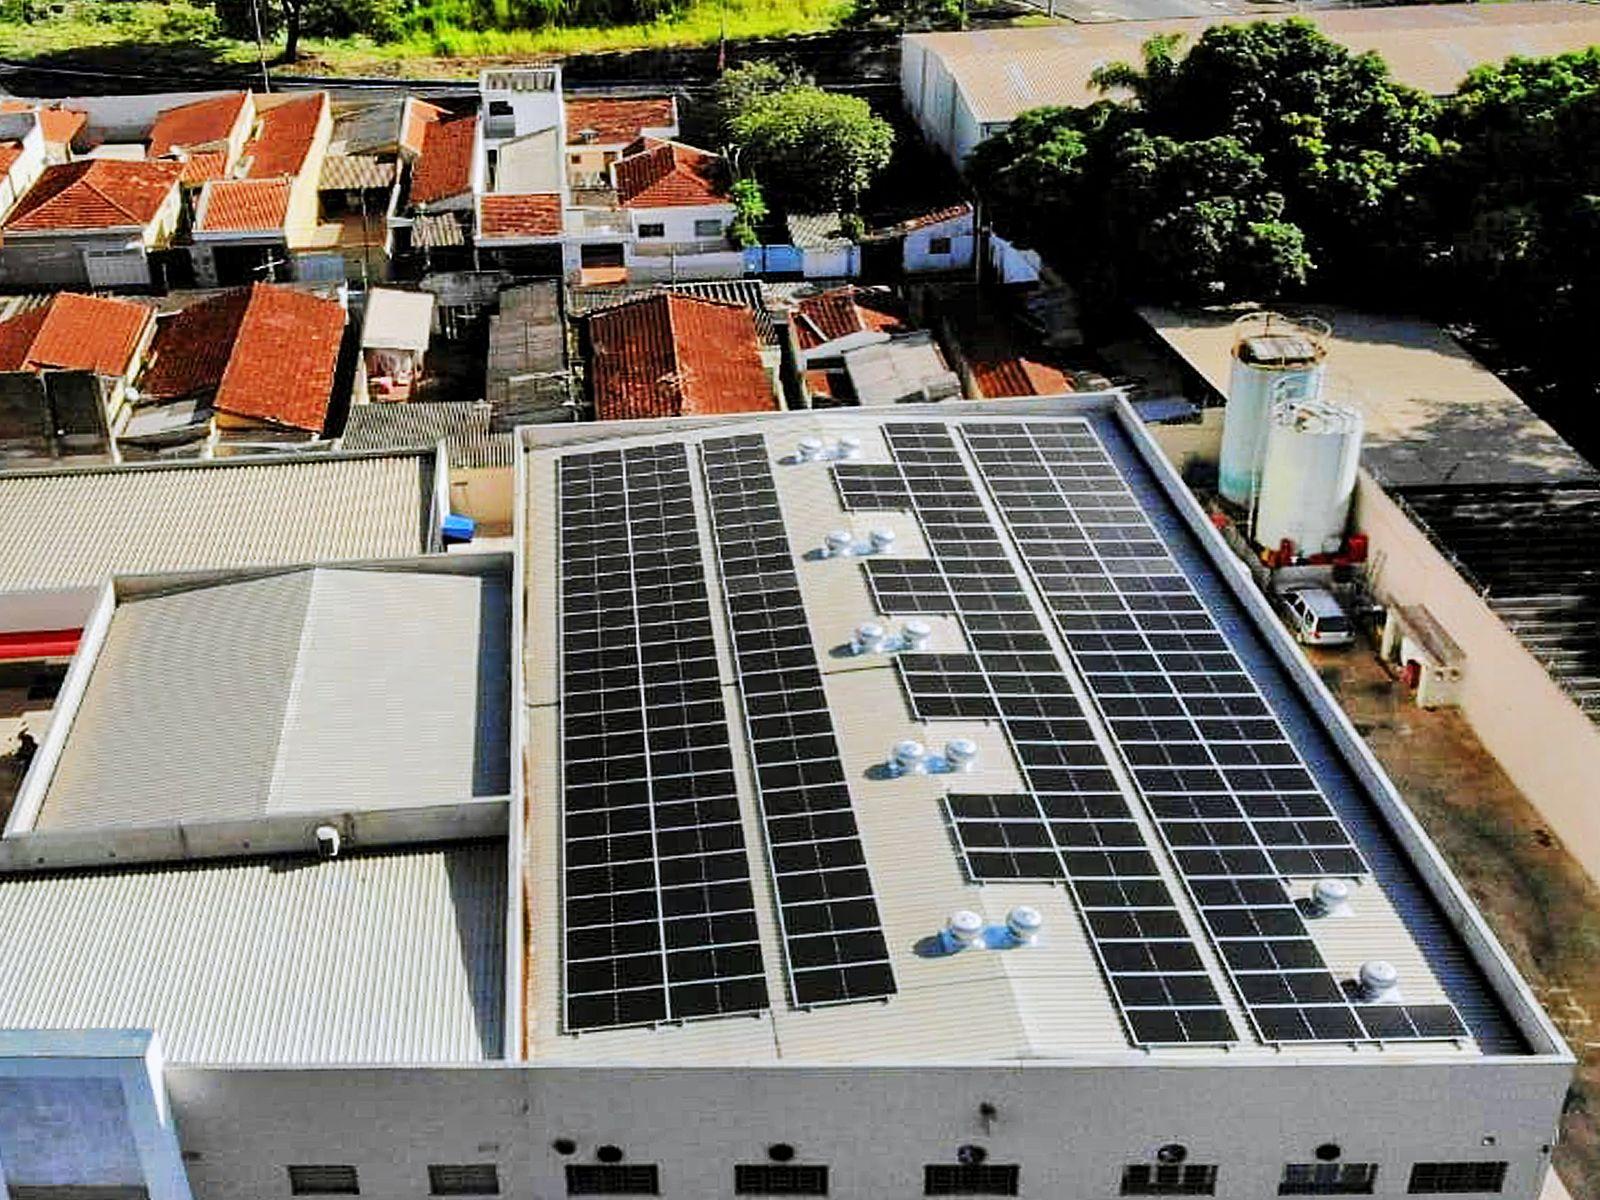 170 PV panels installed on the roof are bringing the total system size to 90.1 kW in Ribeirão Preto-SP, Brazil (2)